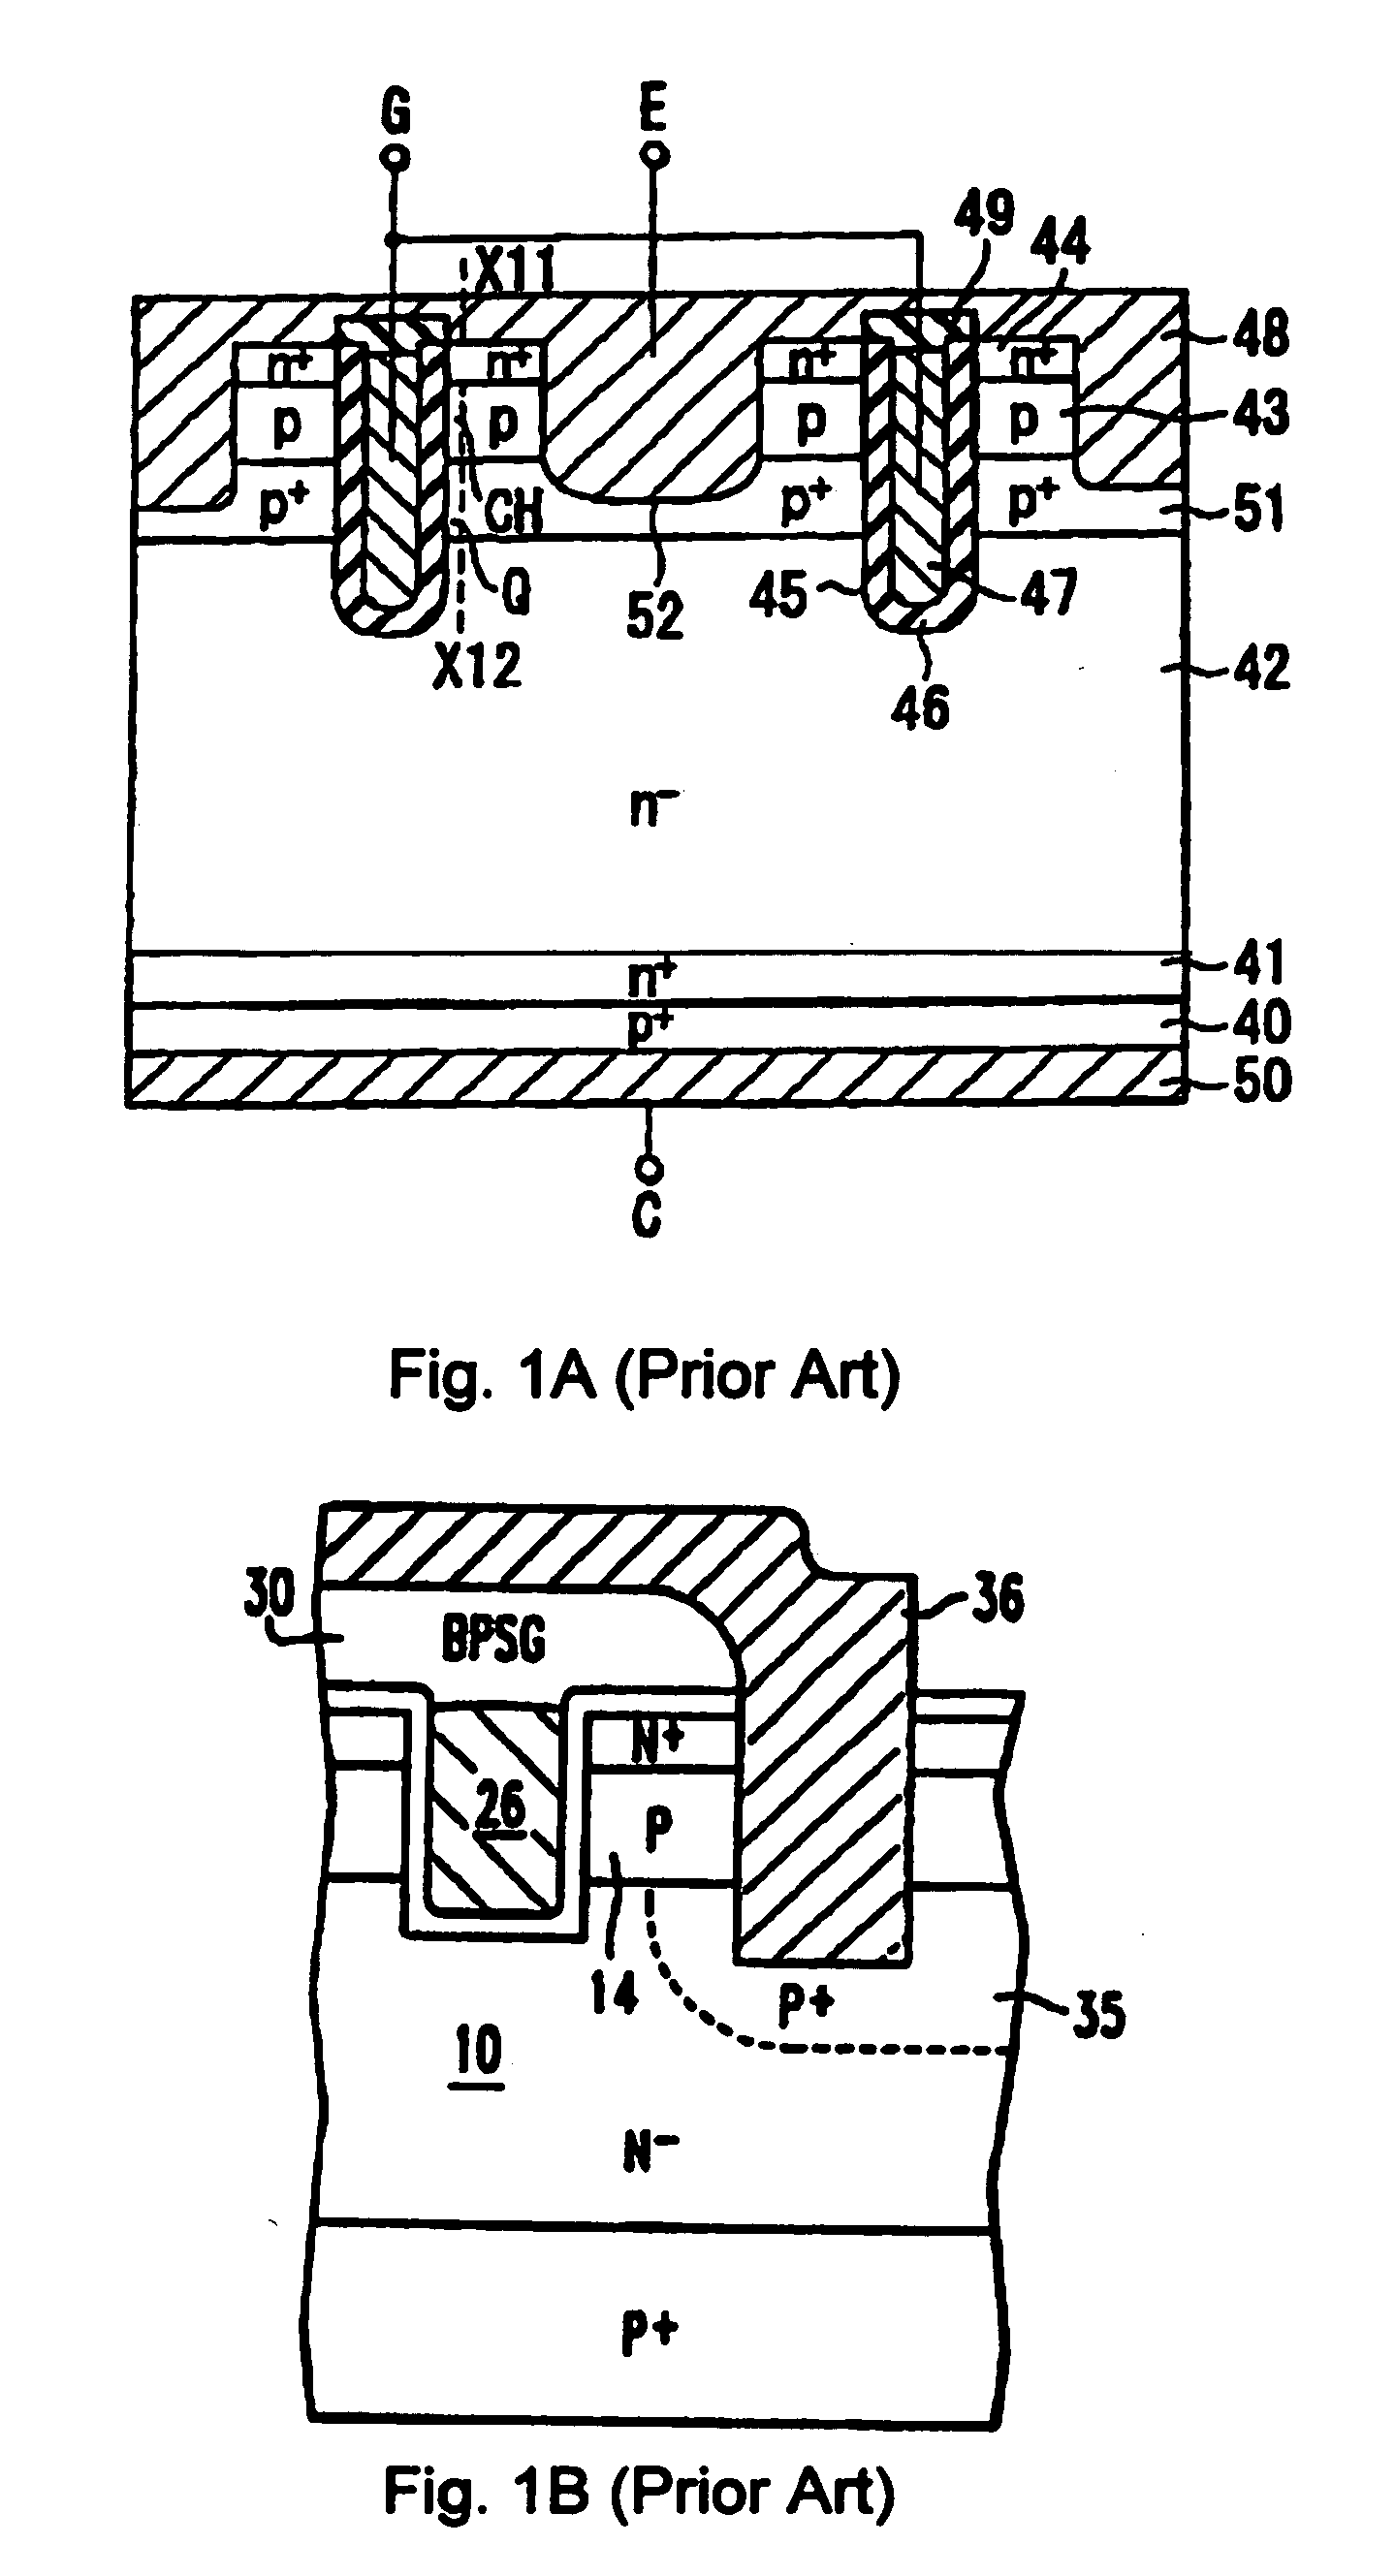 Trench insulated gate bipolar transistor (GBT) with improved emitter-base contacts and metal schemes